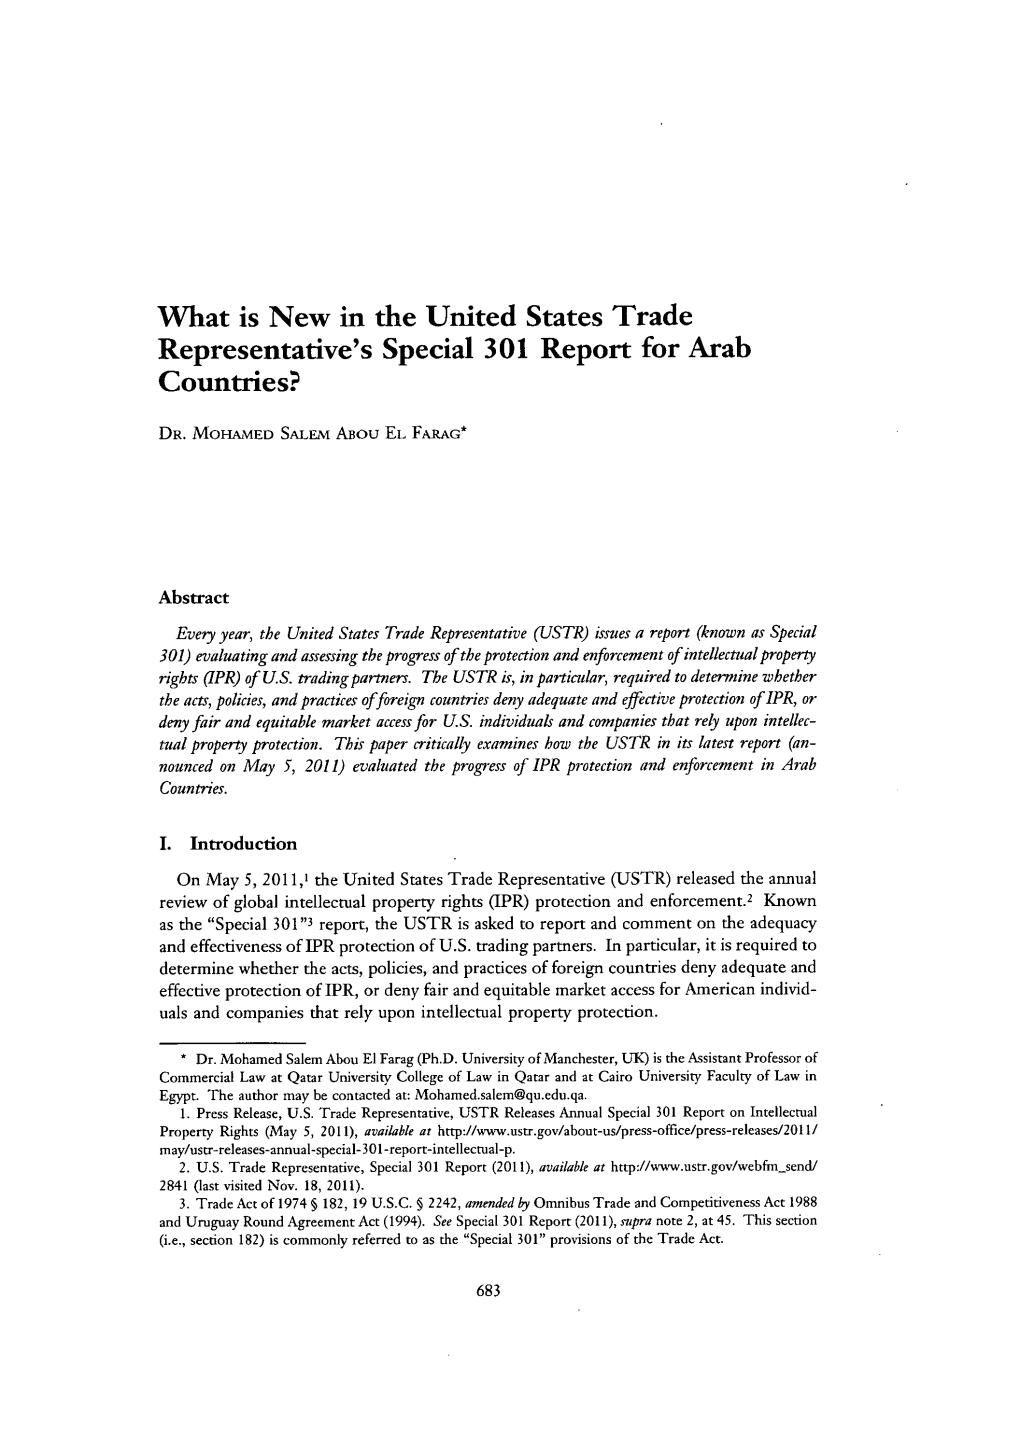 What Is New in the United States Trade Representative's Special 301 Report for Arab Countries?